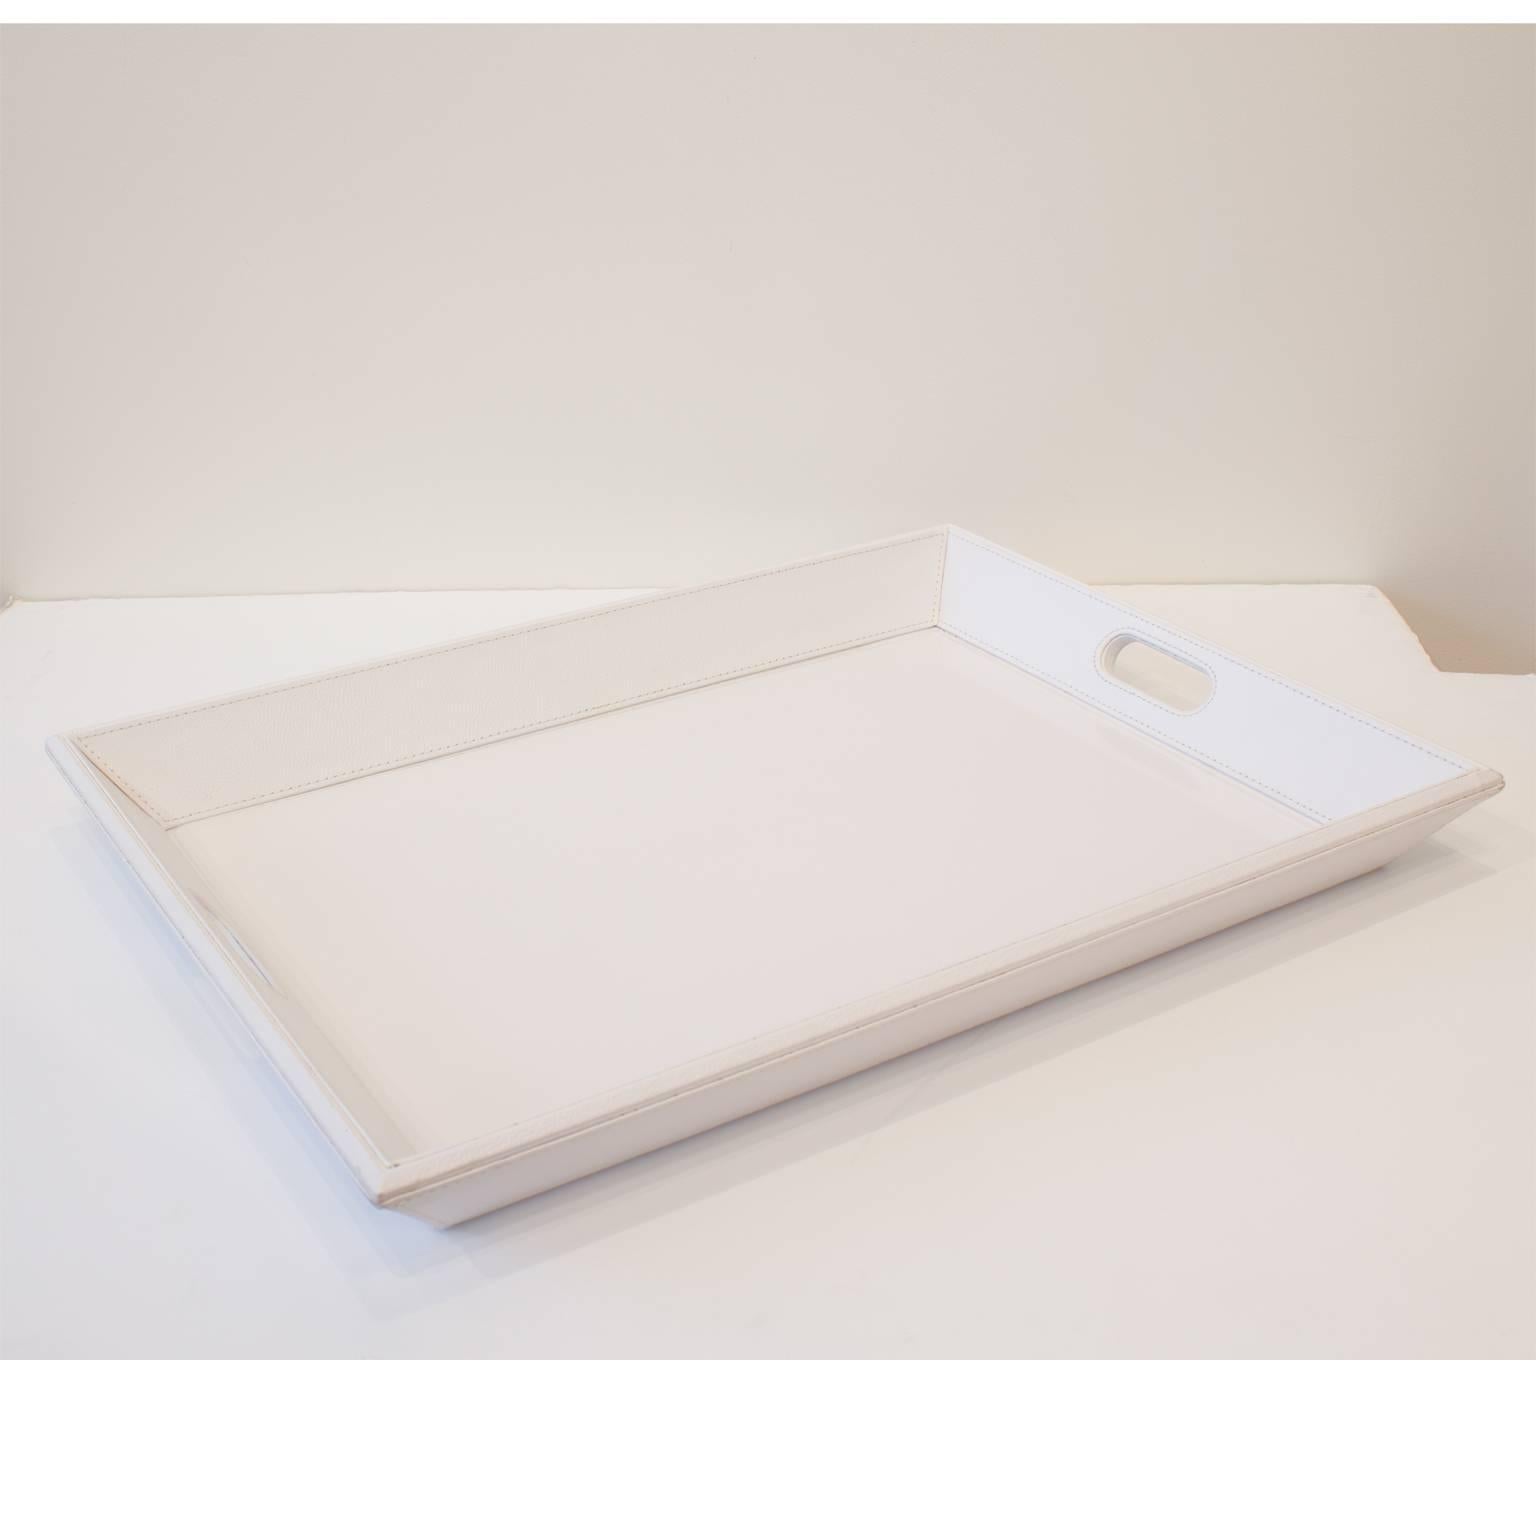 Exceptional Hand-Stitched White Leather Tray For Sale 1